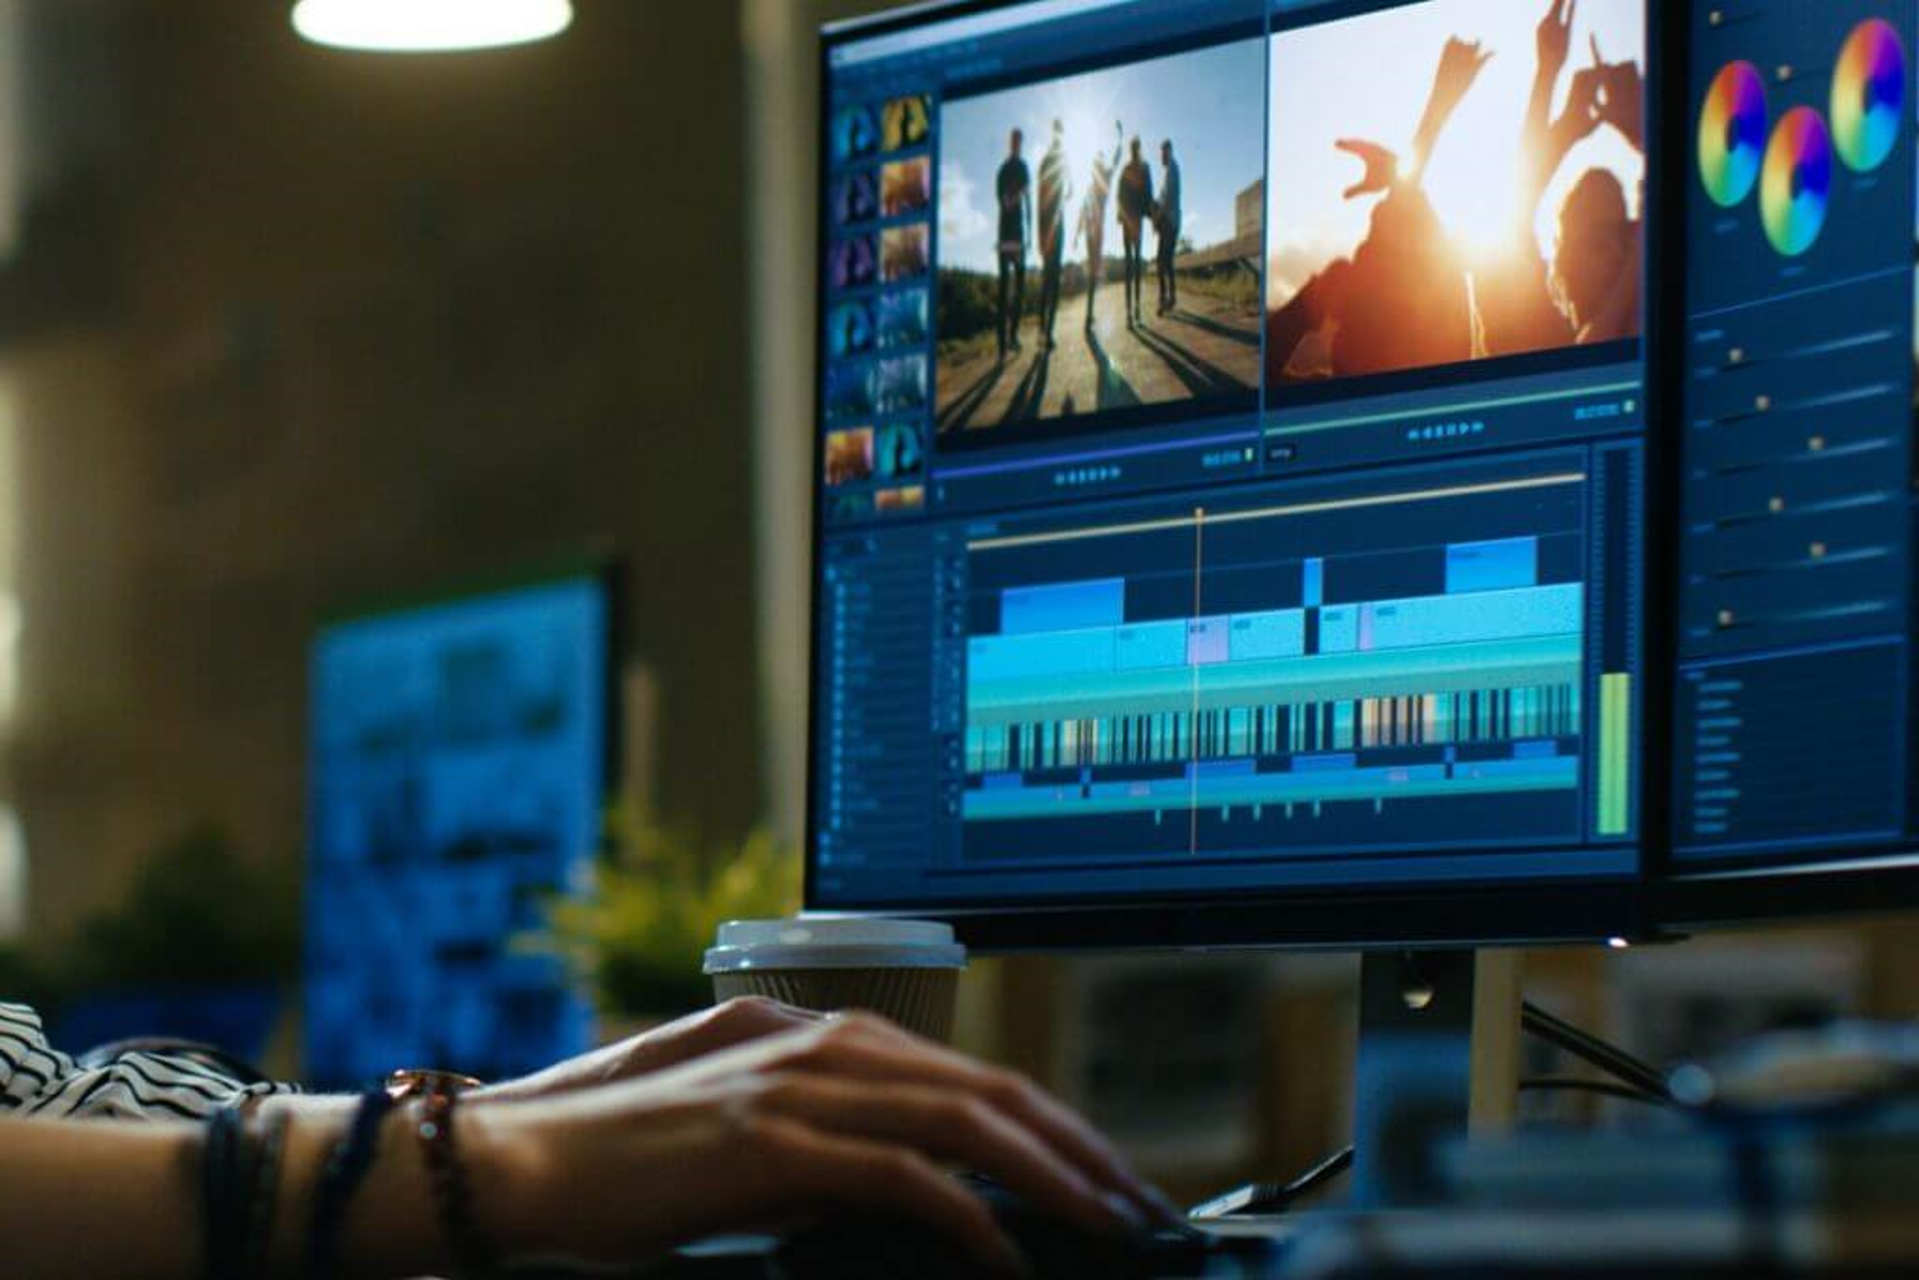 professional video editing software free download for mac